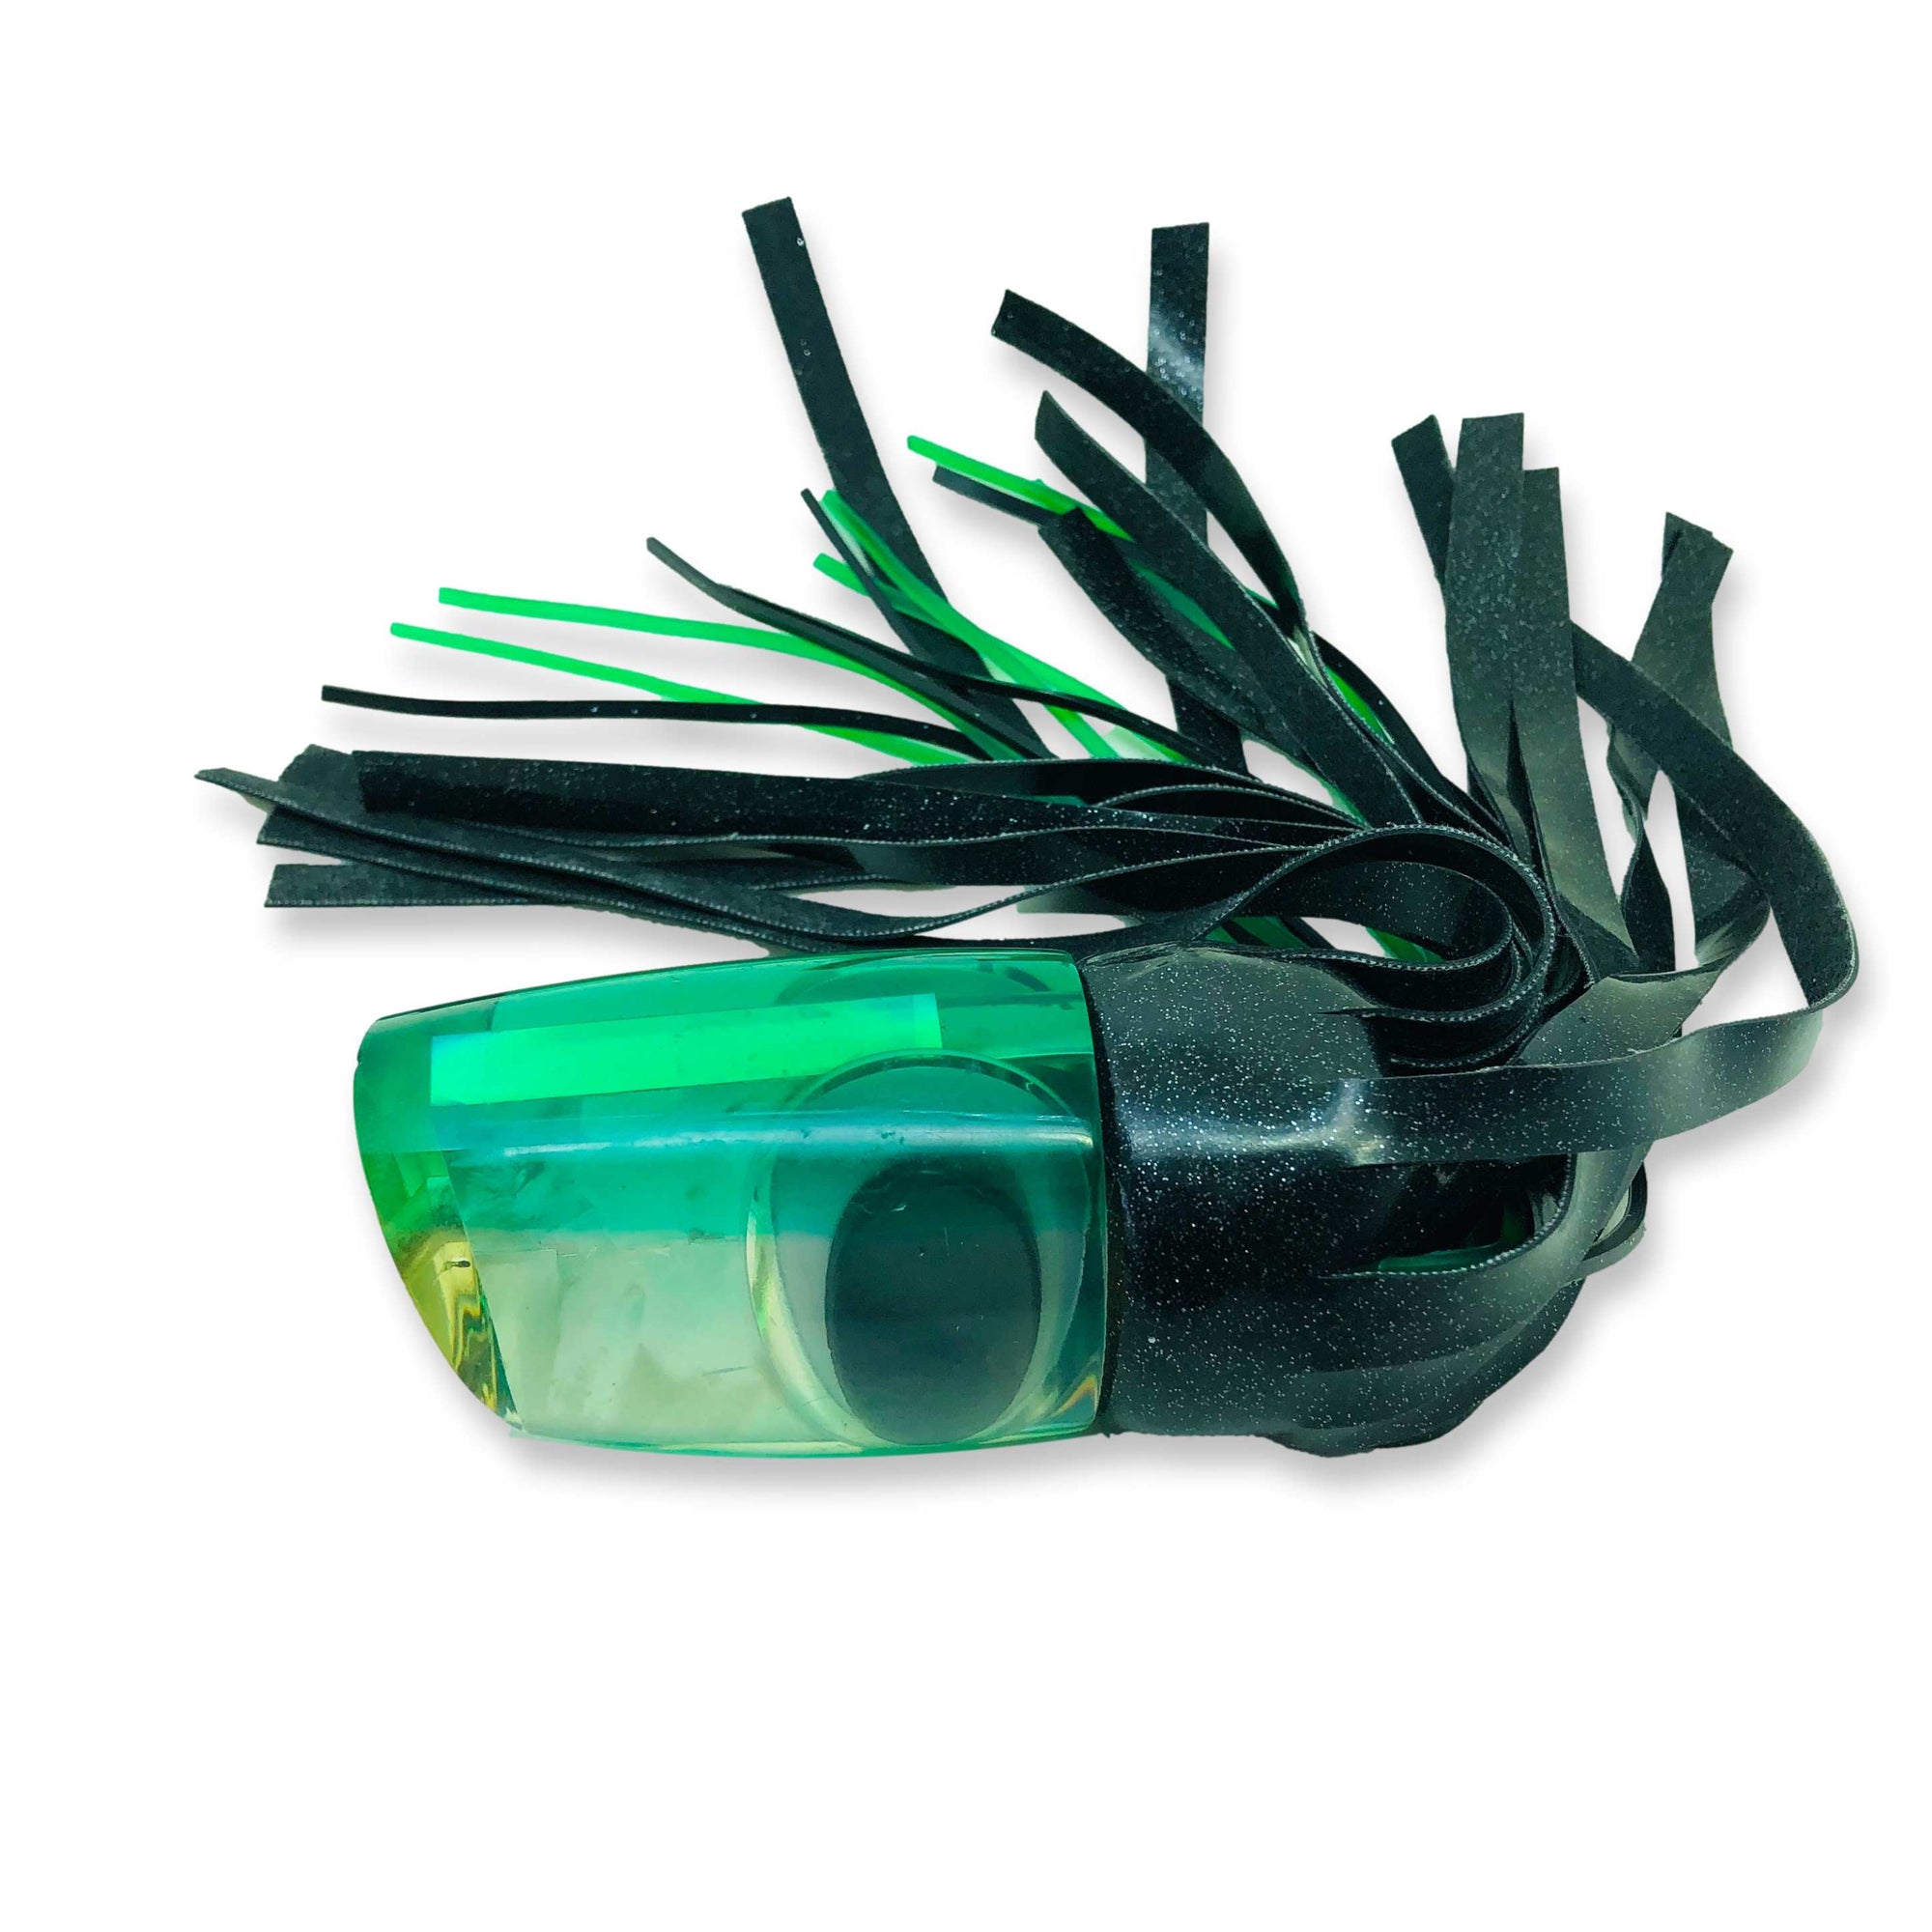 Marlin Magic Lures-Great Deal! Marlin Magic Extra Large 14" Green Ruckus Skirted in Vinyl - Used-Used Lures